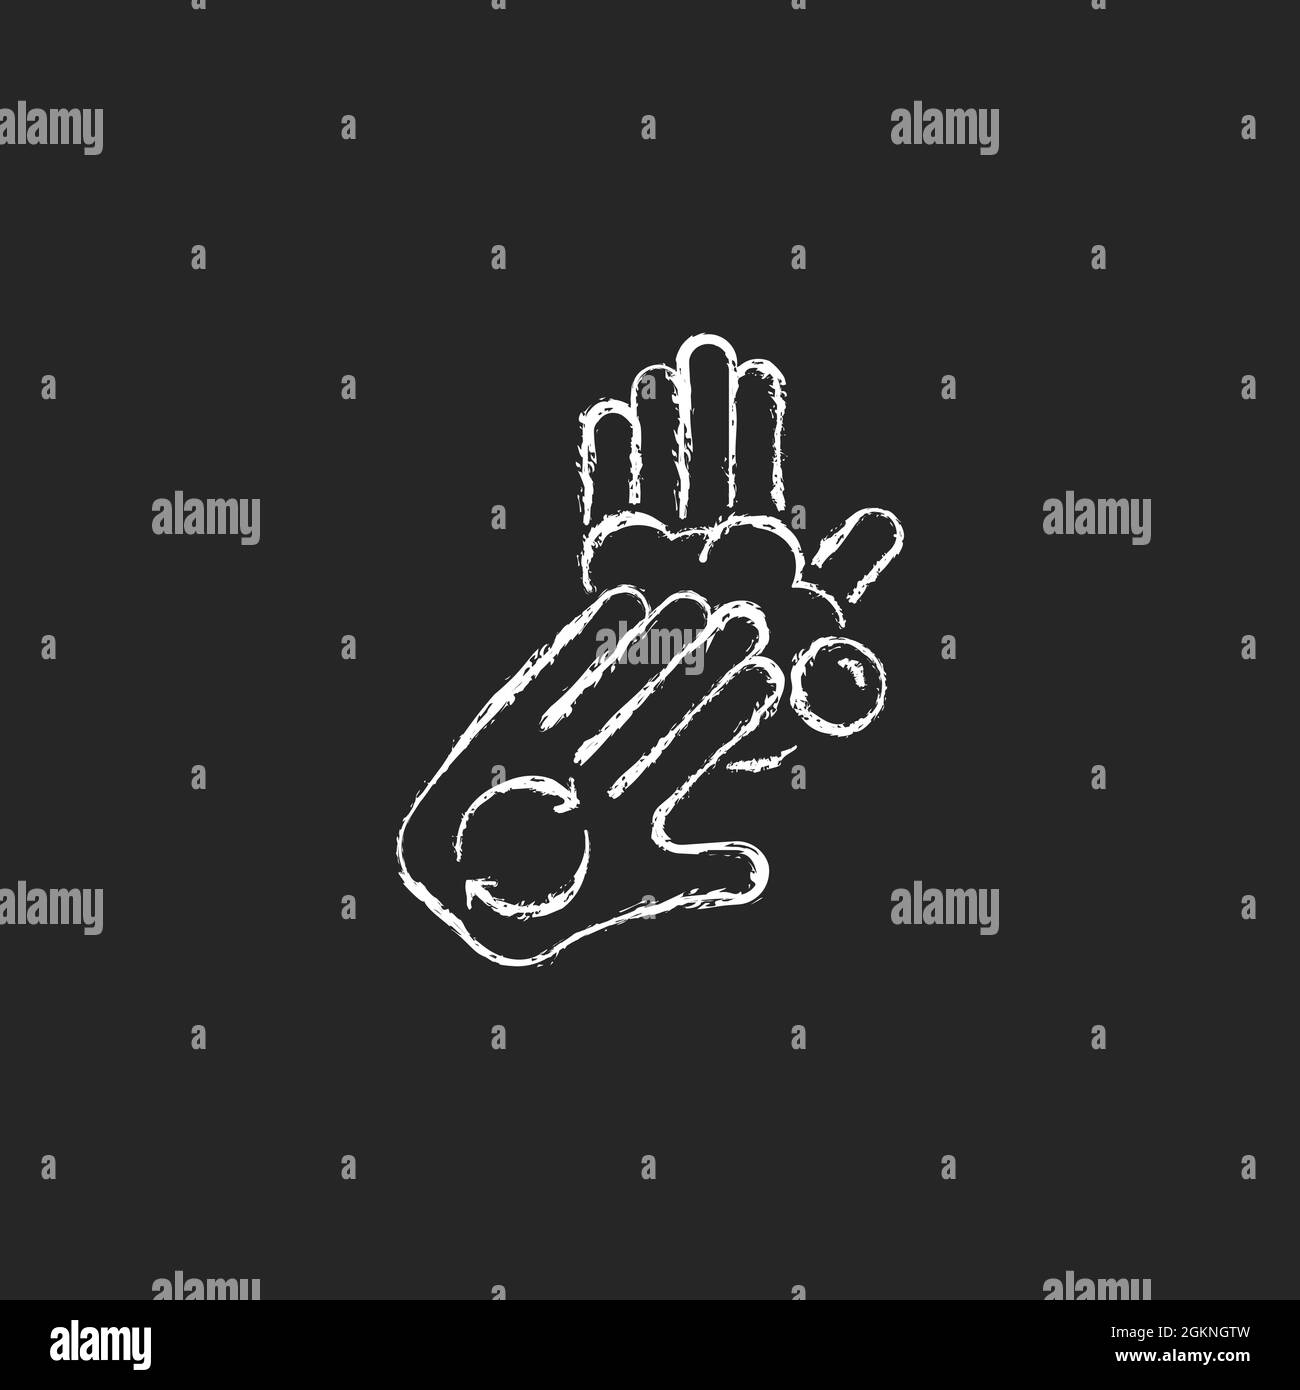 Rub palms with fingers chalk white icon on dark background Stock Vector